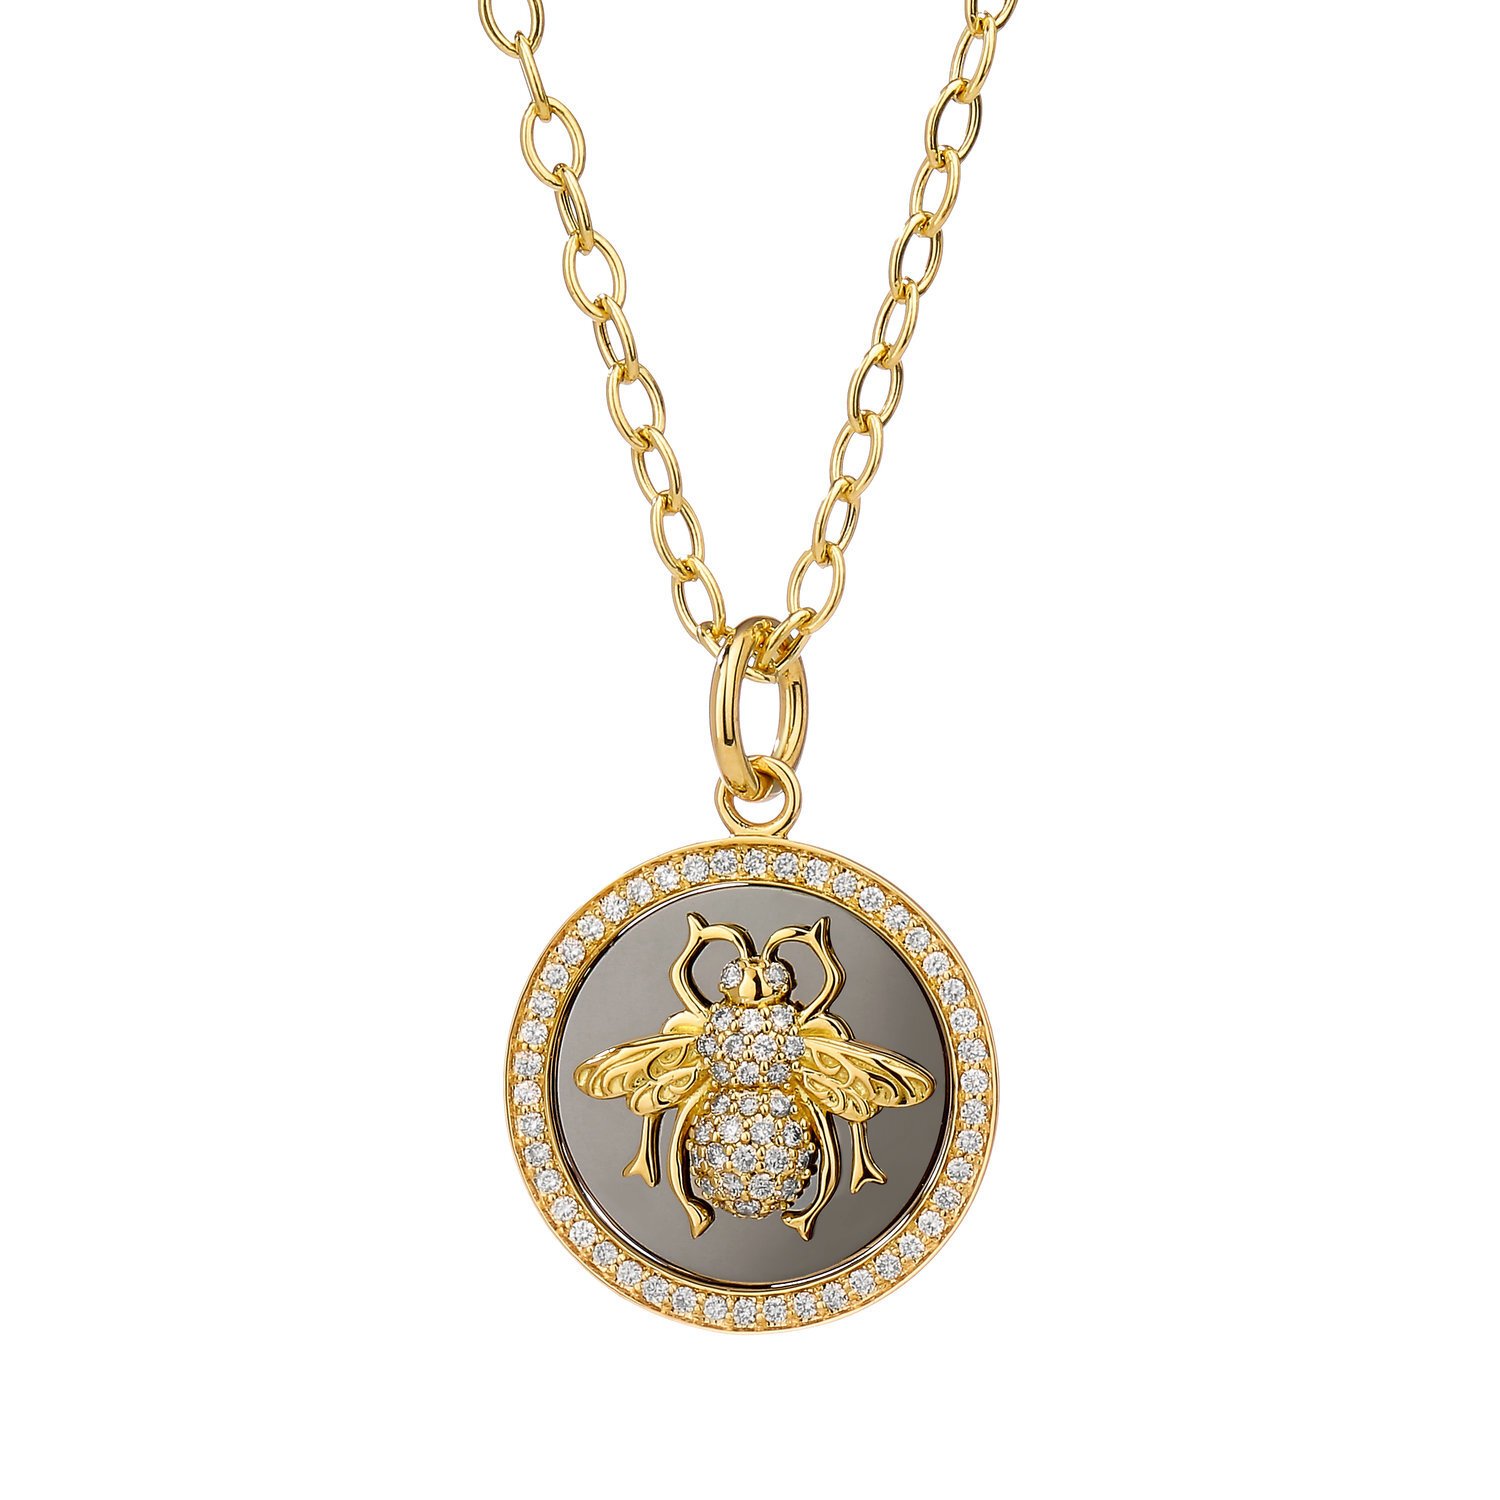 Llimited Edition QUEEN BEE PENDANT